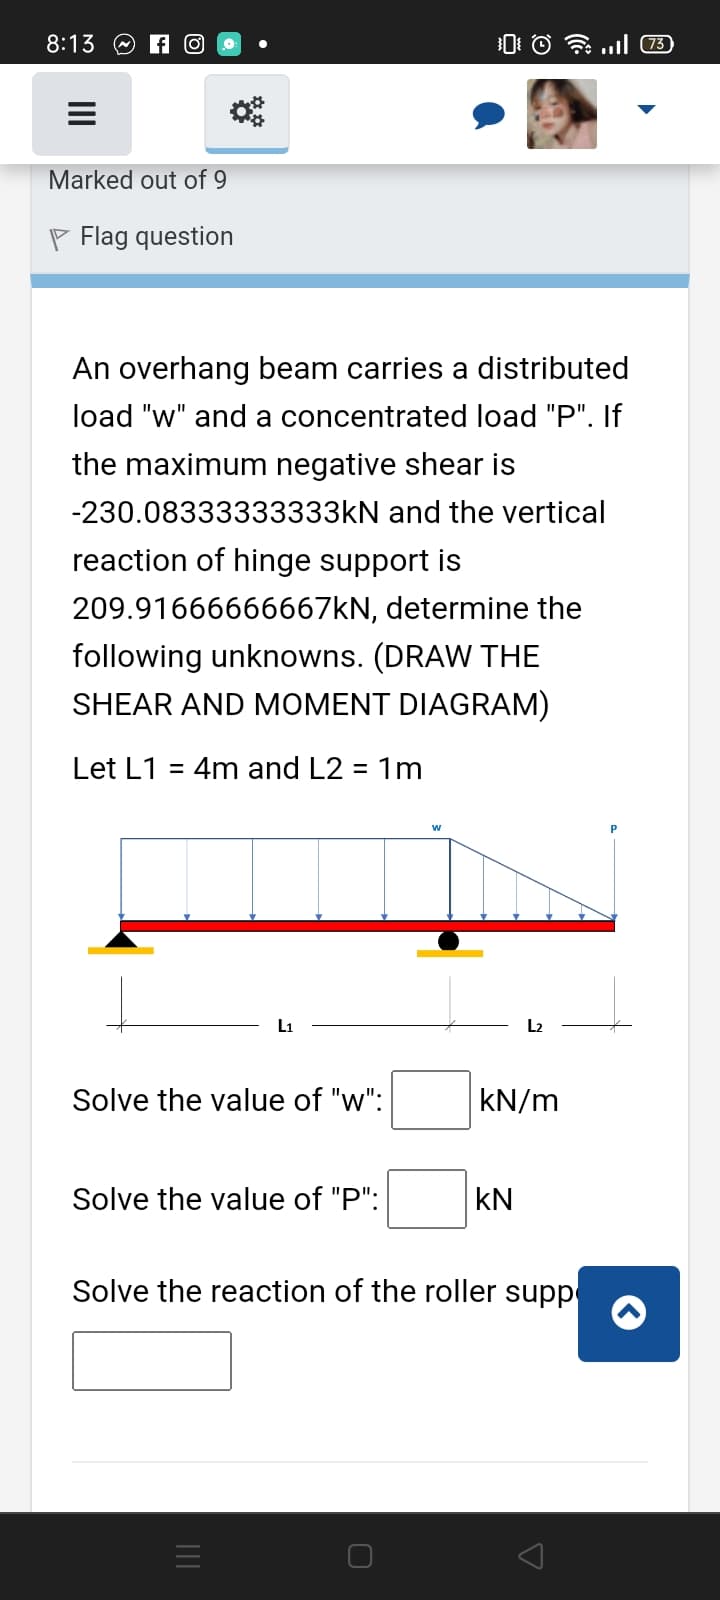 8:13 O A O
0: © l 73
Marked out of 9
P Flag question
An overhang beam carries a distributed
load "w" and a concentrated load "P". If
the maximum negative shear is
-230.08333333333KN and the vertical
reaction of hinge support is
209.91666666667KN, determine the
following unknowns. (DRAW THE
SHEAR AND MOMENT DIAGRAM)
Let L1 = 4m and L2 = 1m
%3D
w
L1
L2
Solve the value of "w":
kN/m
Solve the value of "P":
kN
Solve the reaction of the roller supp
